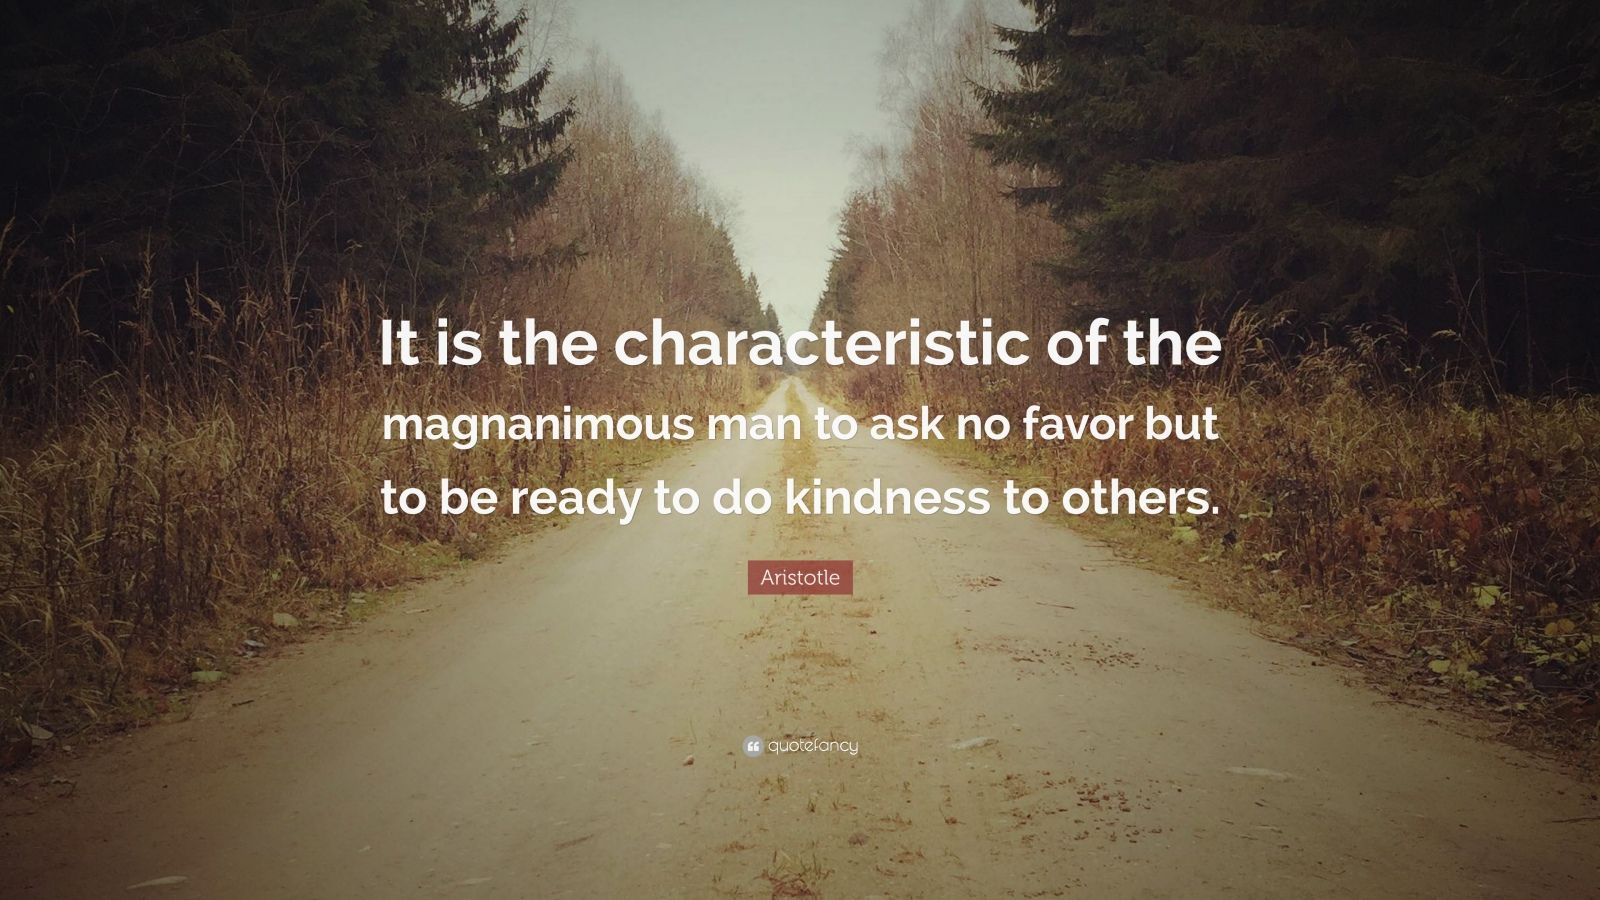 Aristotle Quote: “It is the characteristic of the magnanimous man to